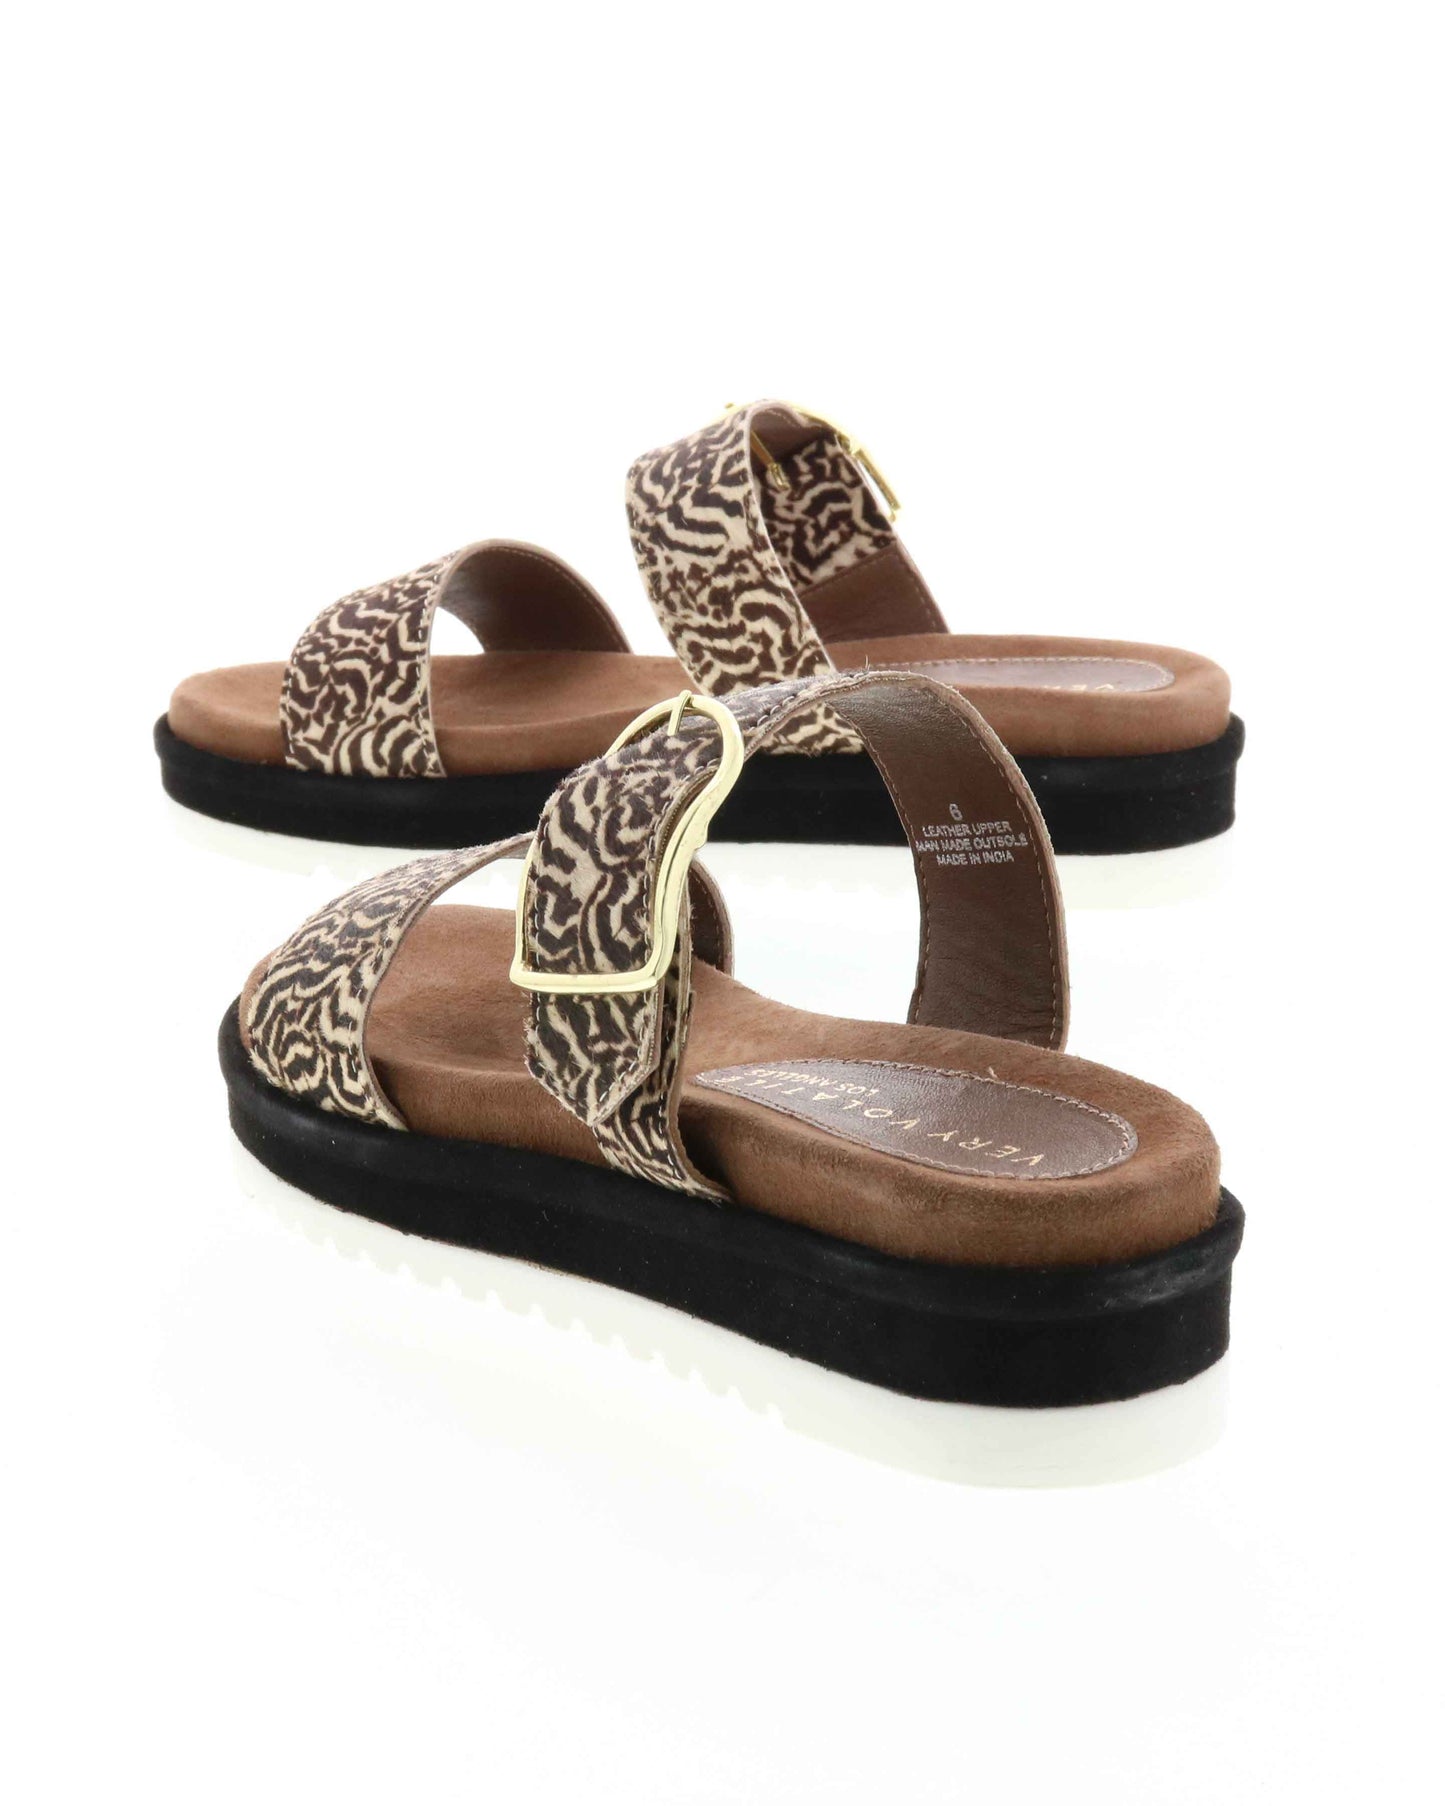 DOUBLE STRAP MINI FLATFORM SANDAL - Genuine calf-hair upper - Leather lining - Adjustable metal buckle - Two band slip-on sandal style - Anatomic suede covered footbed - Suede covered low platform bottom - White ridged outsole - Approx. 1.5" heel height back